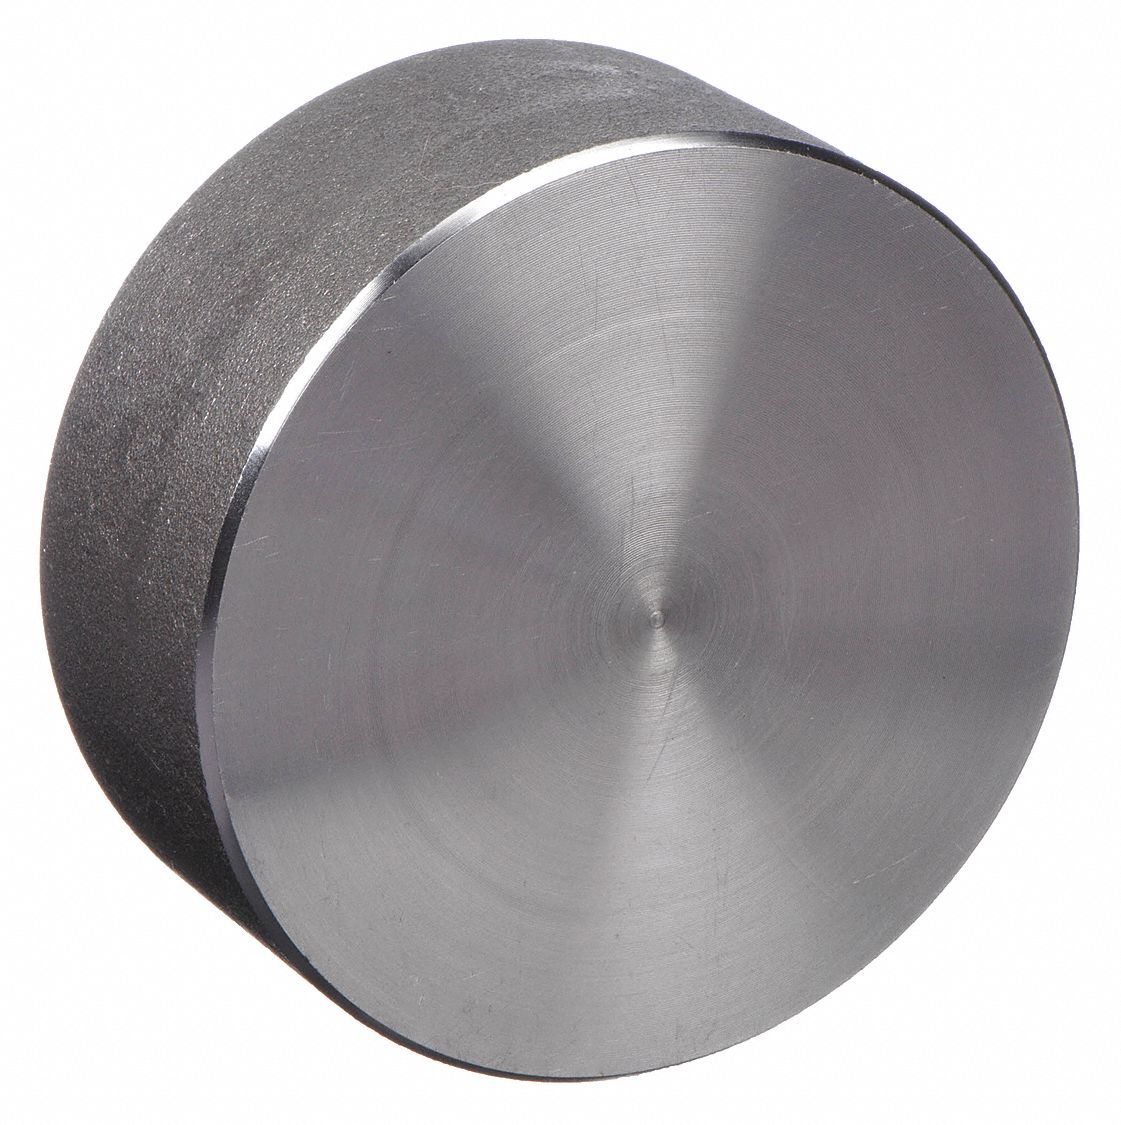 Threaded Pipe Cap Manufacturers, ASME B16.11 Forged End Cap